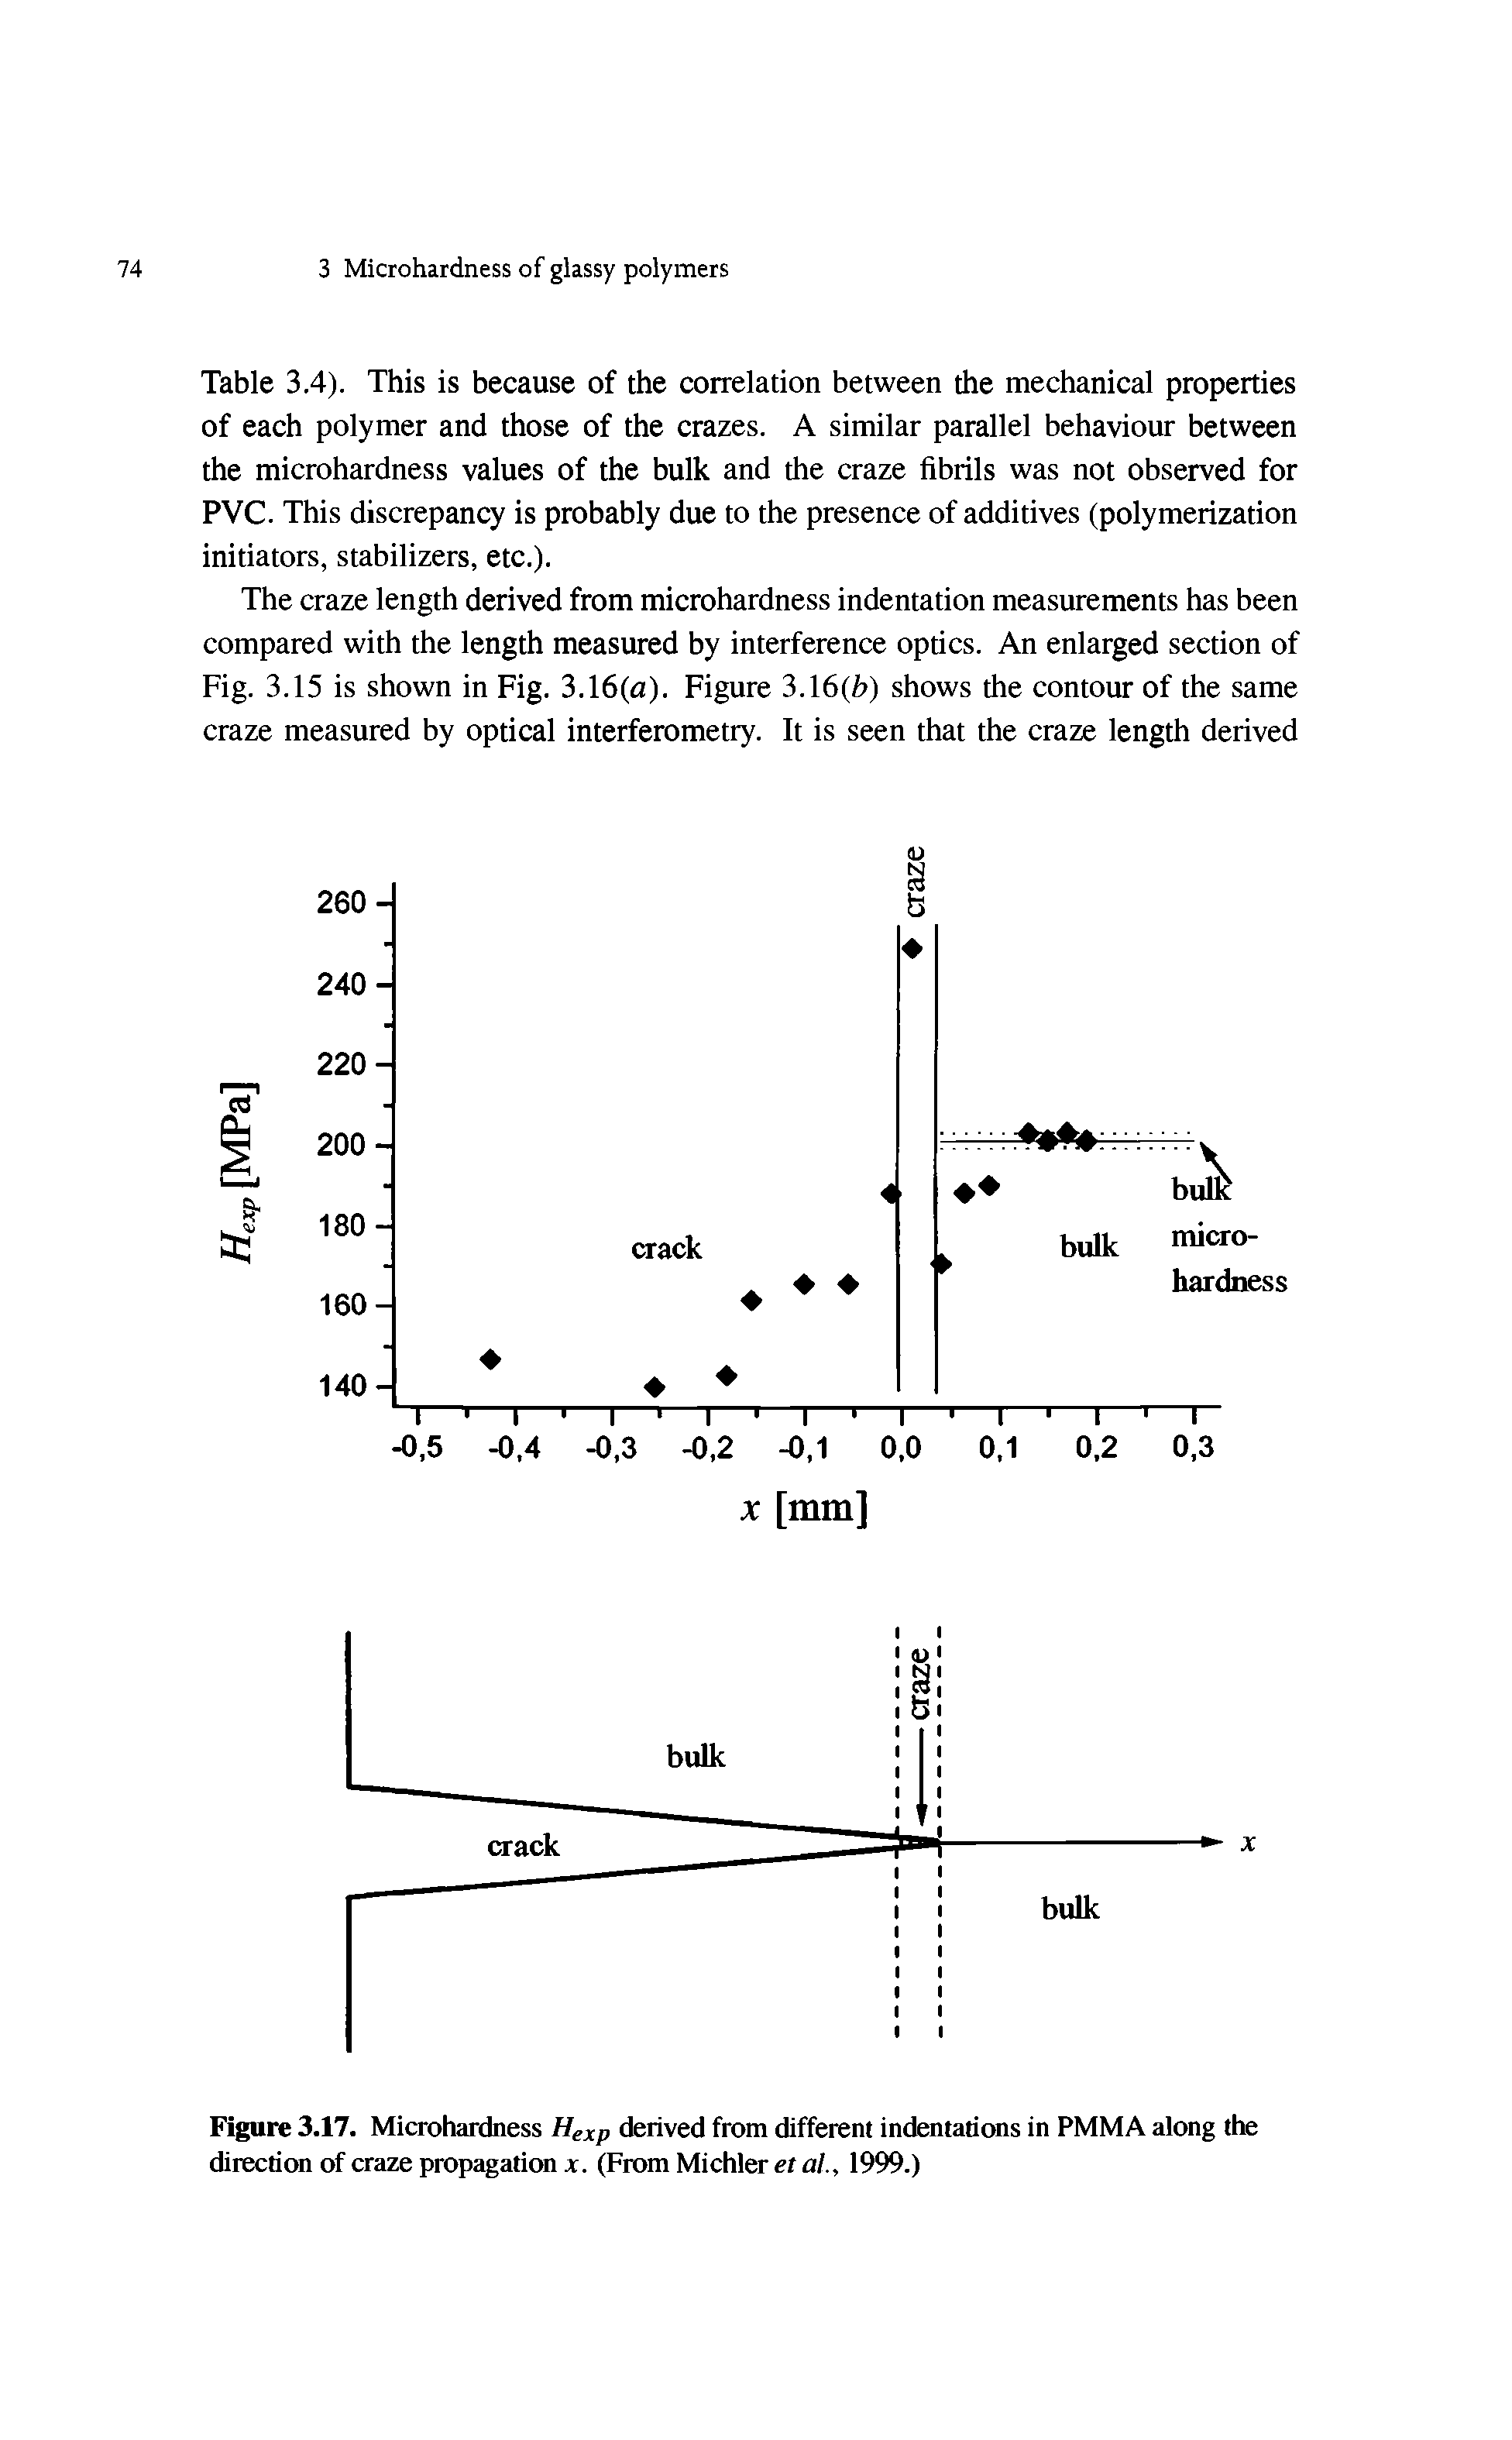 Table 3.4). This is because of the correlation between the mechanical properties of each polymer and those of the crazes. A similar parallel behaviour between the microhardness values of the bulk and the craze fibrils was not observed for PVC. This discrepancy is probably due to the presence of additives (polymerization initiators, stabilizers, etc.).